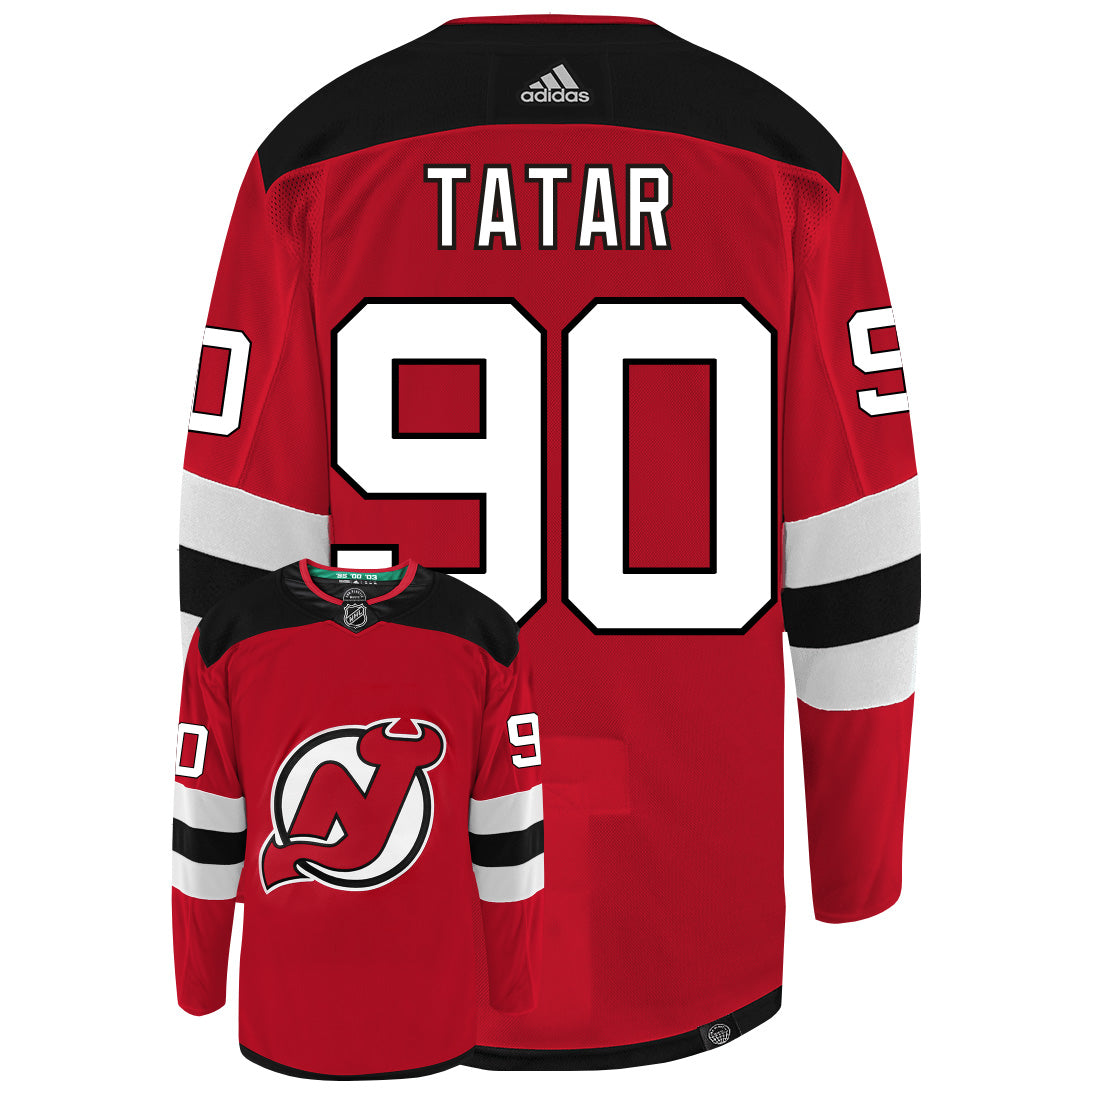 Tomas Tatar New Jersey Devils Adidas Primegreen Authentic NHL Hockey Jersey - Back/Front View